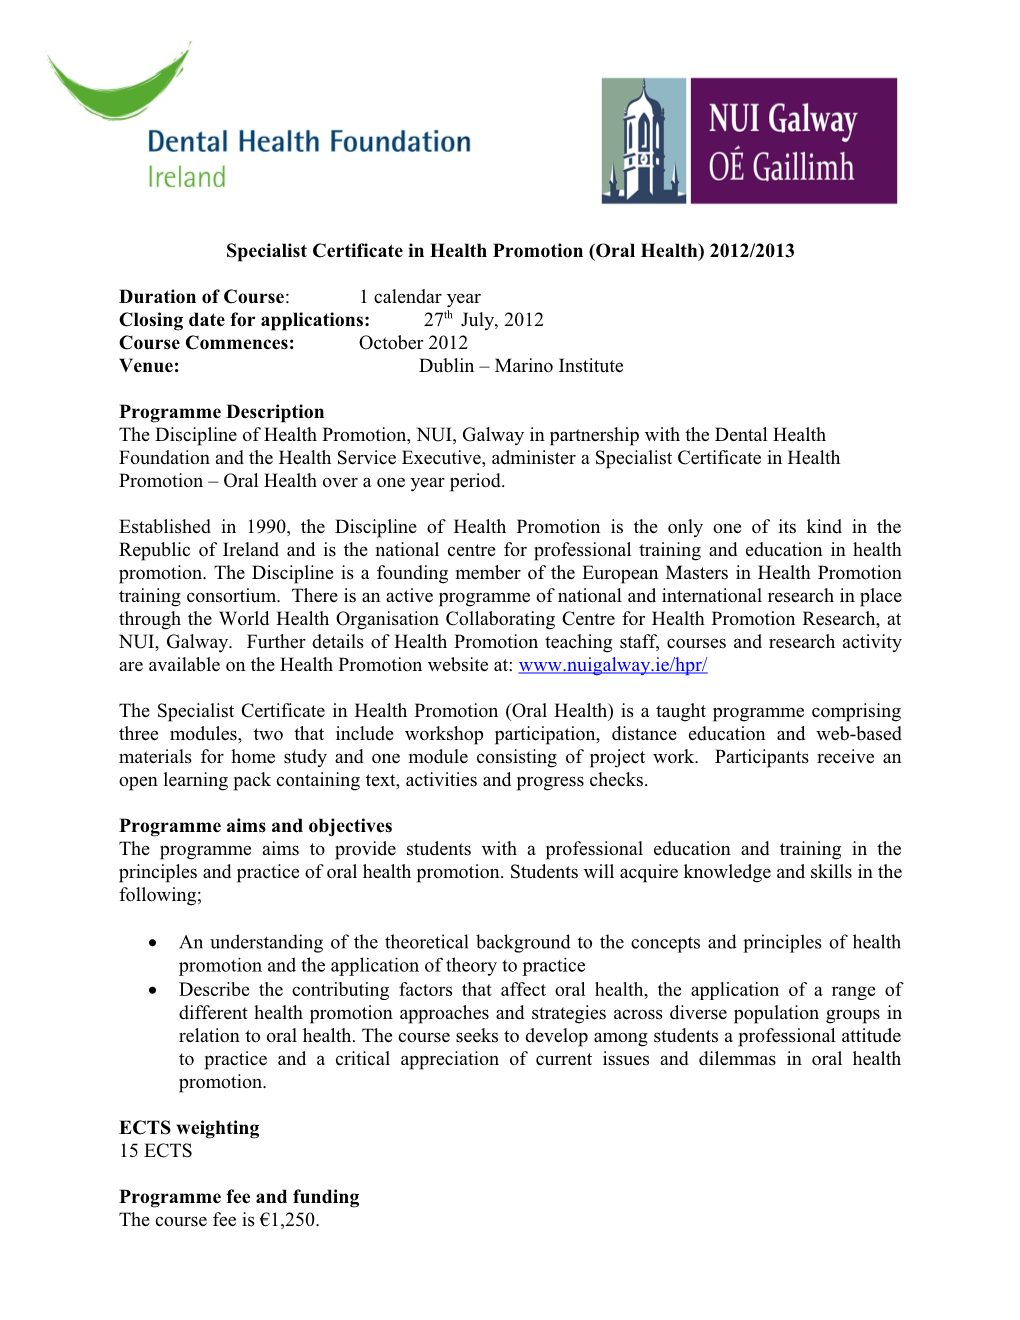 Specialist Certificate in Health Promotion (Oral Health) 2012/2013